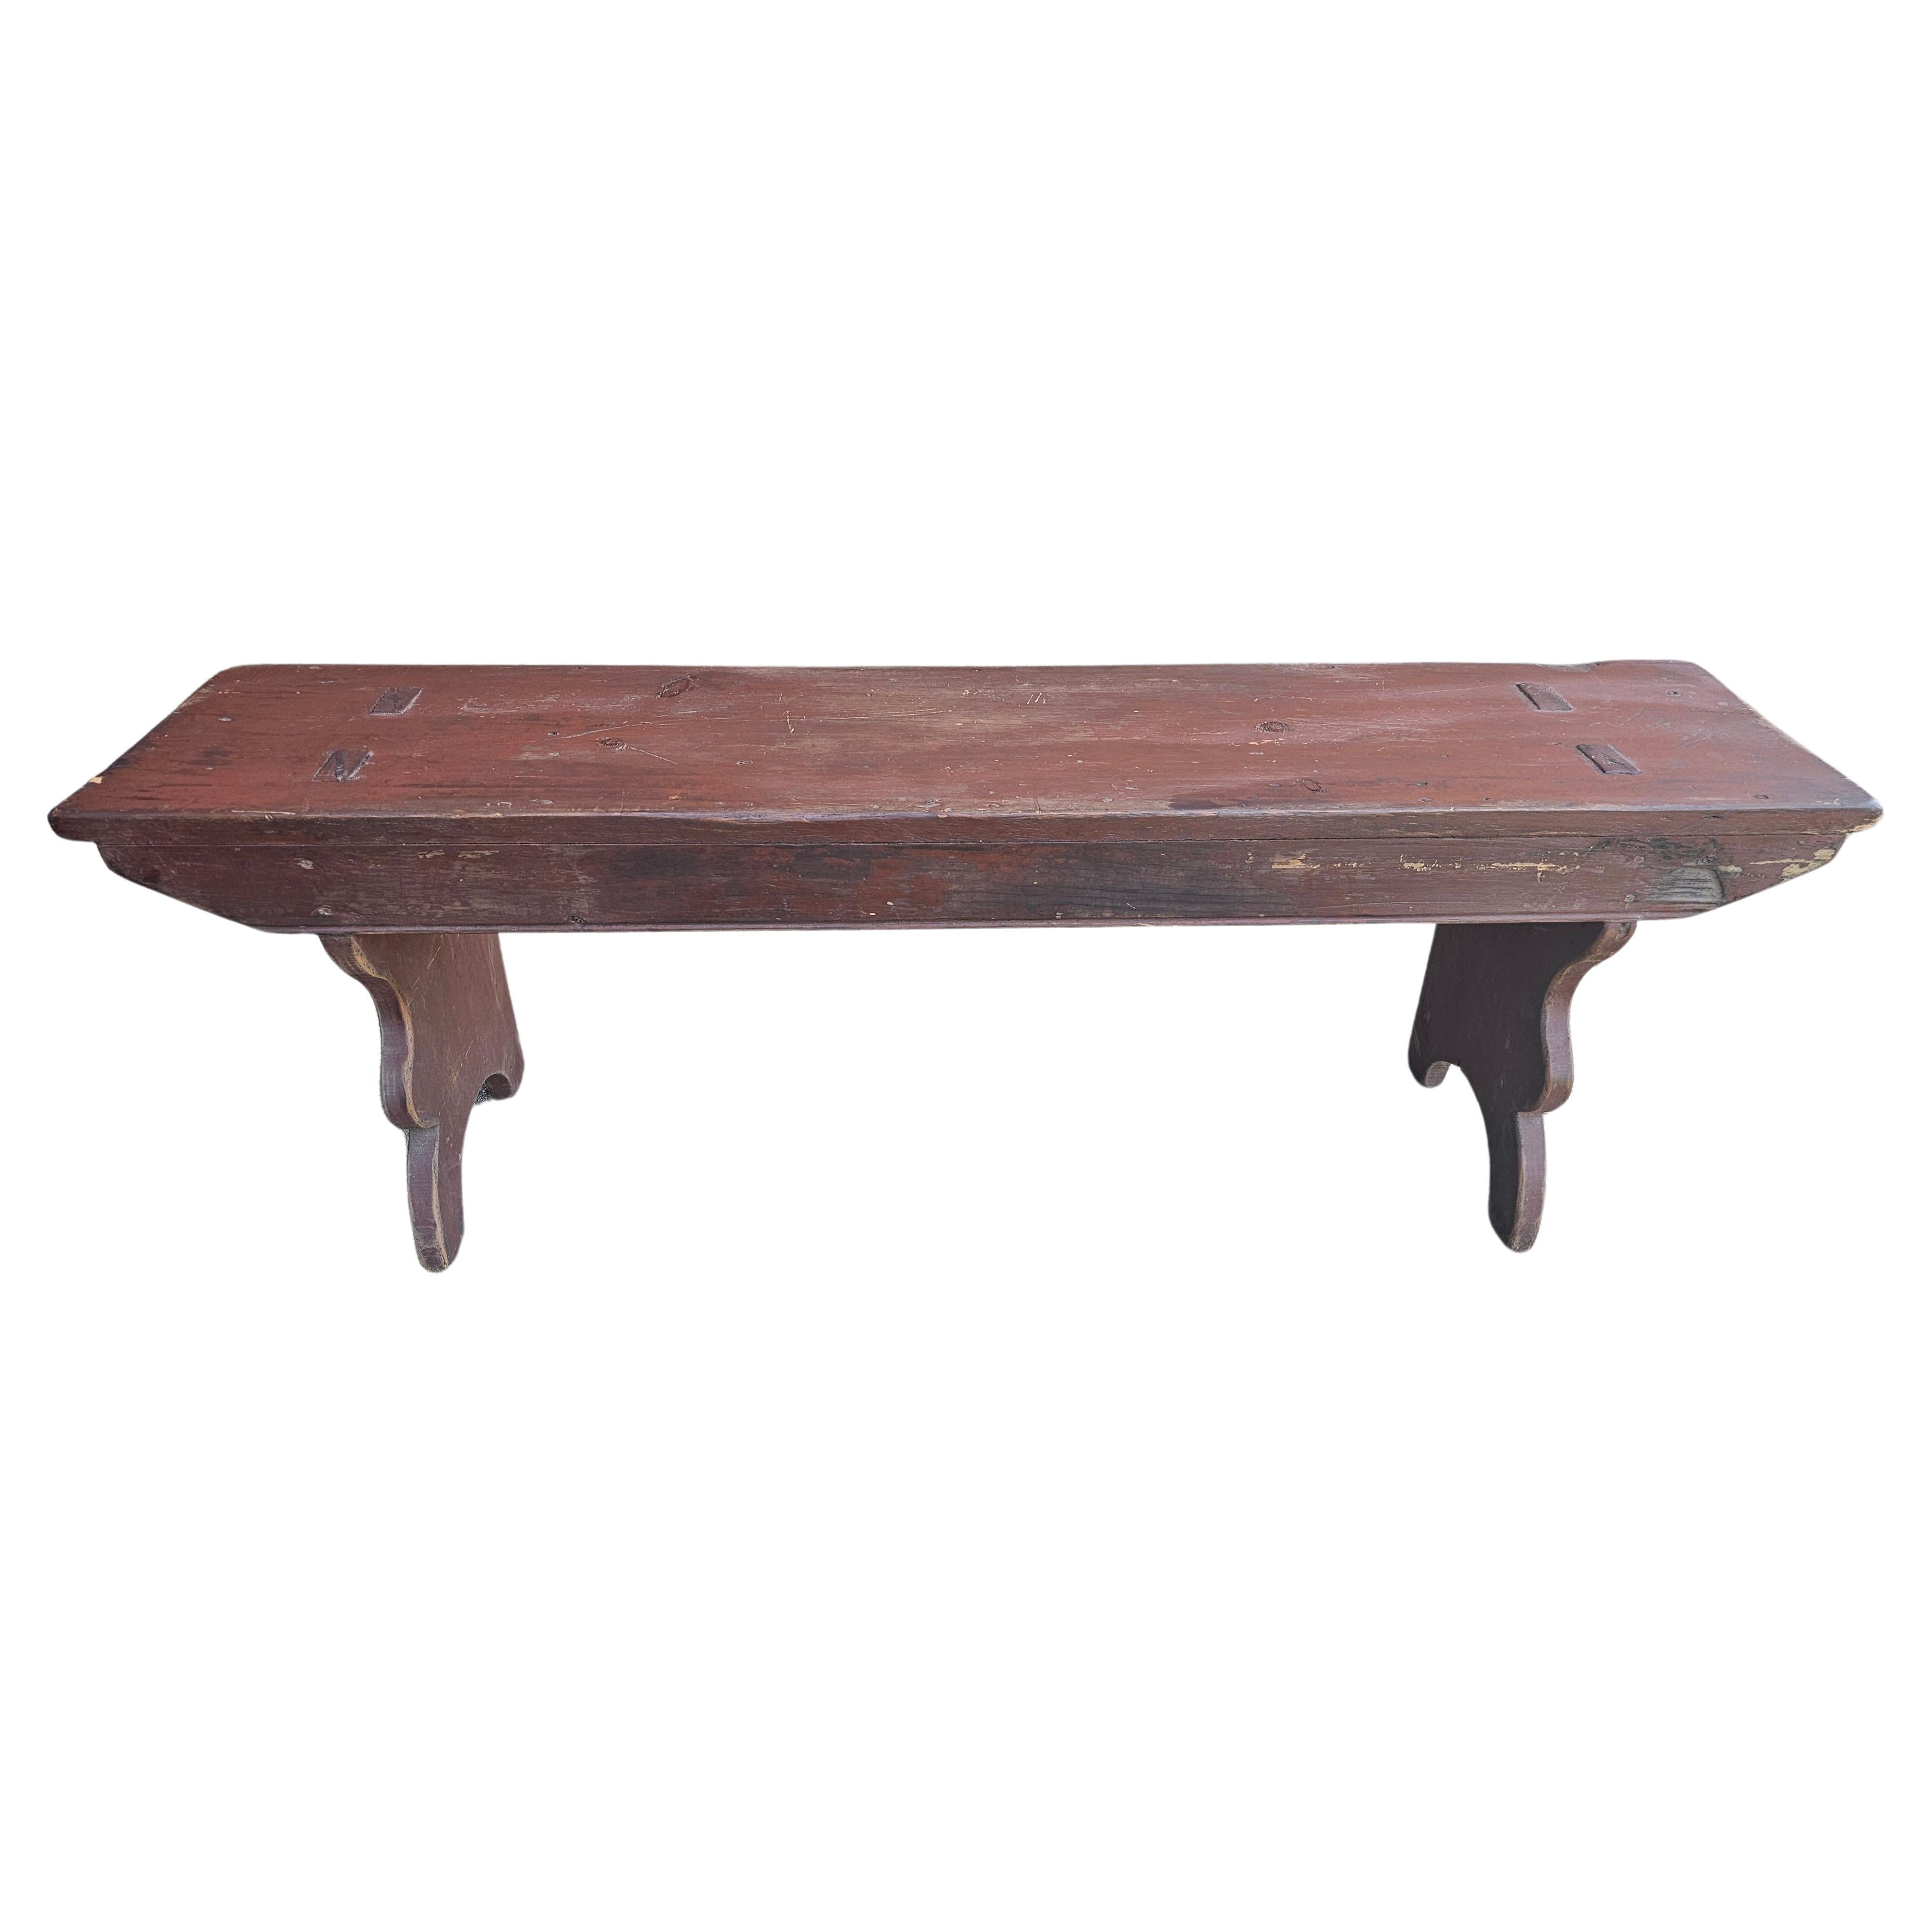 Early American Primitive Bench For Sale